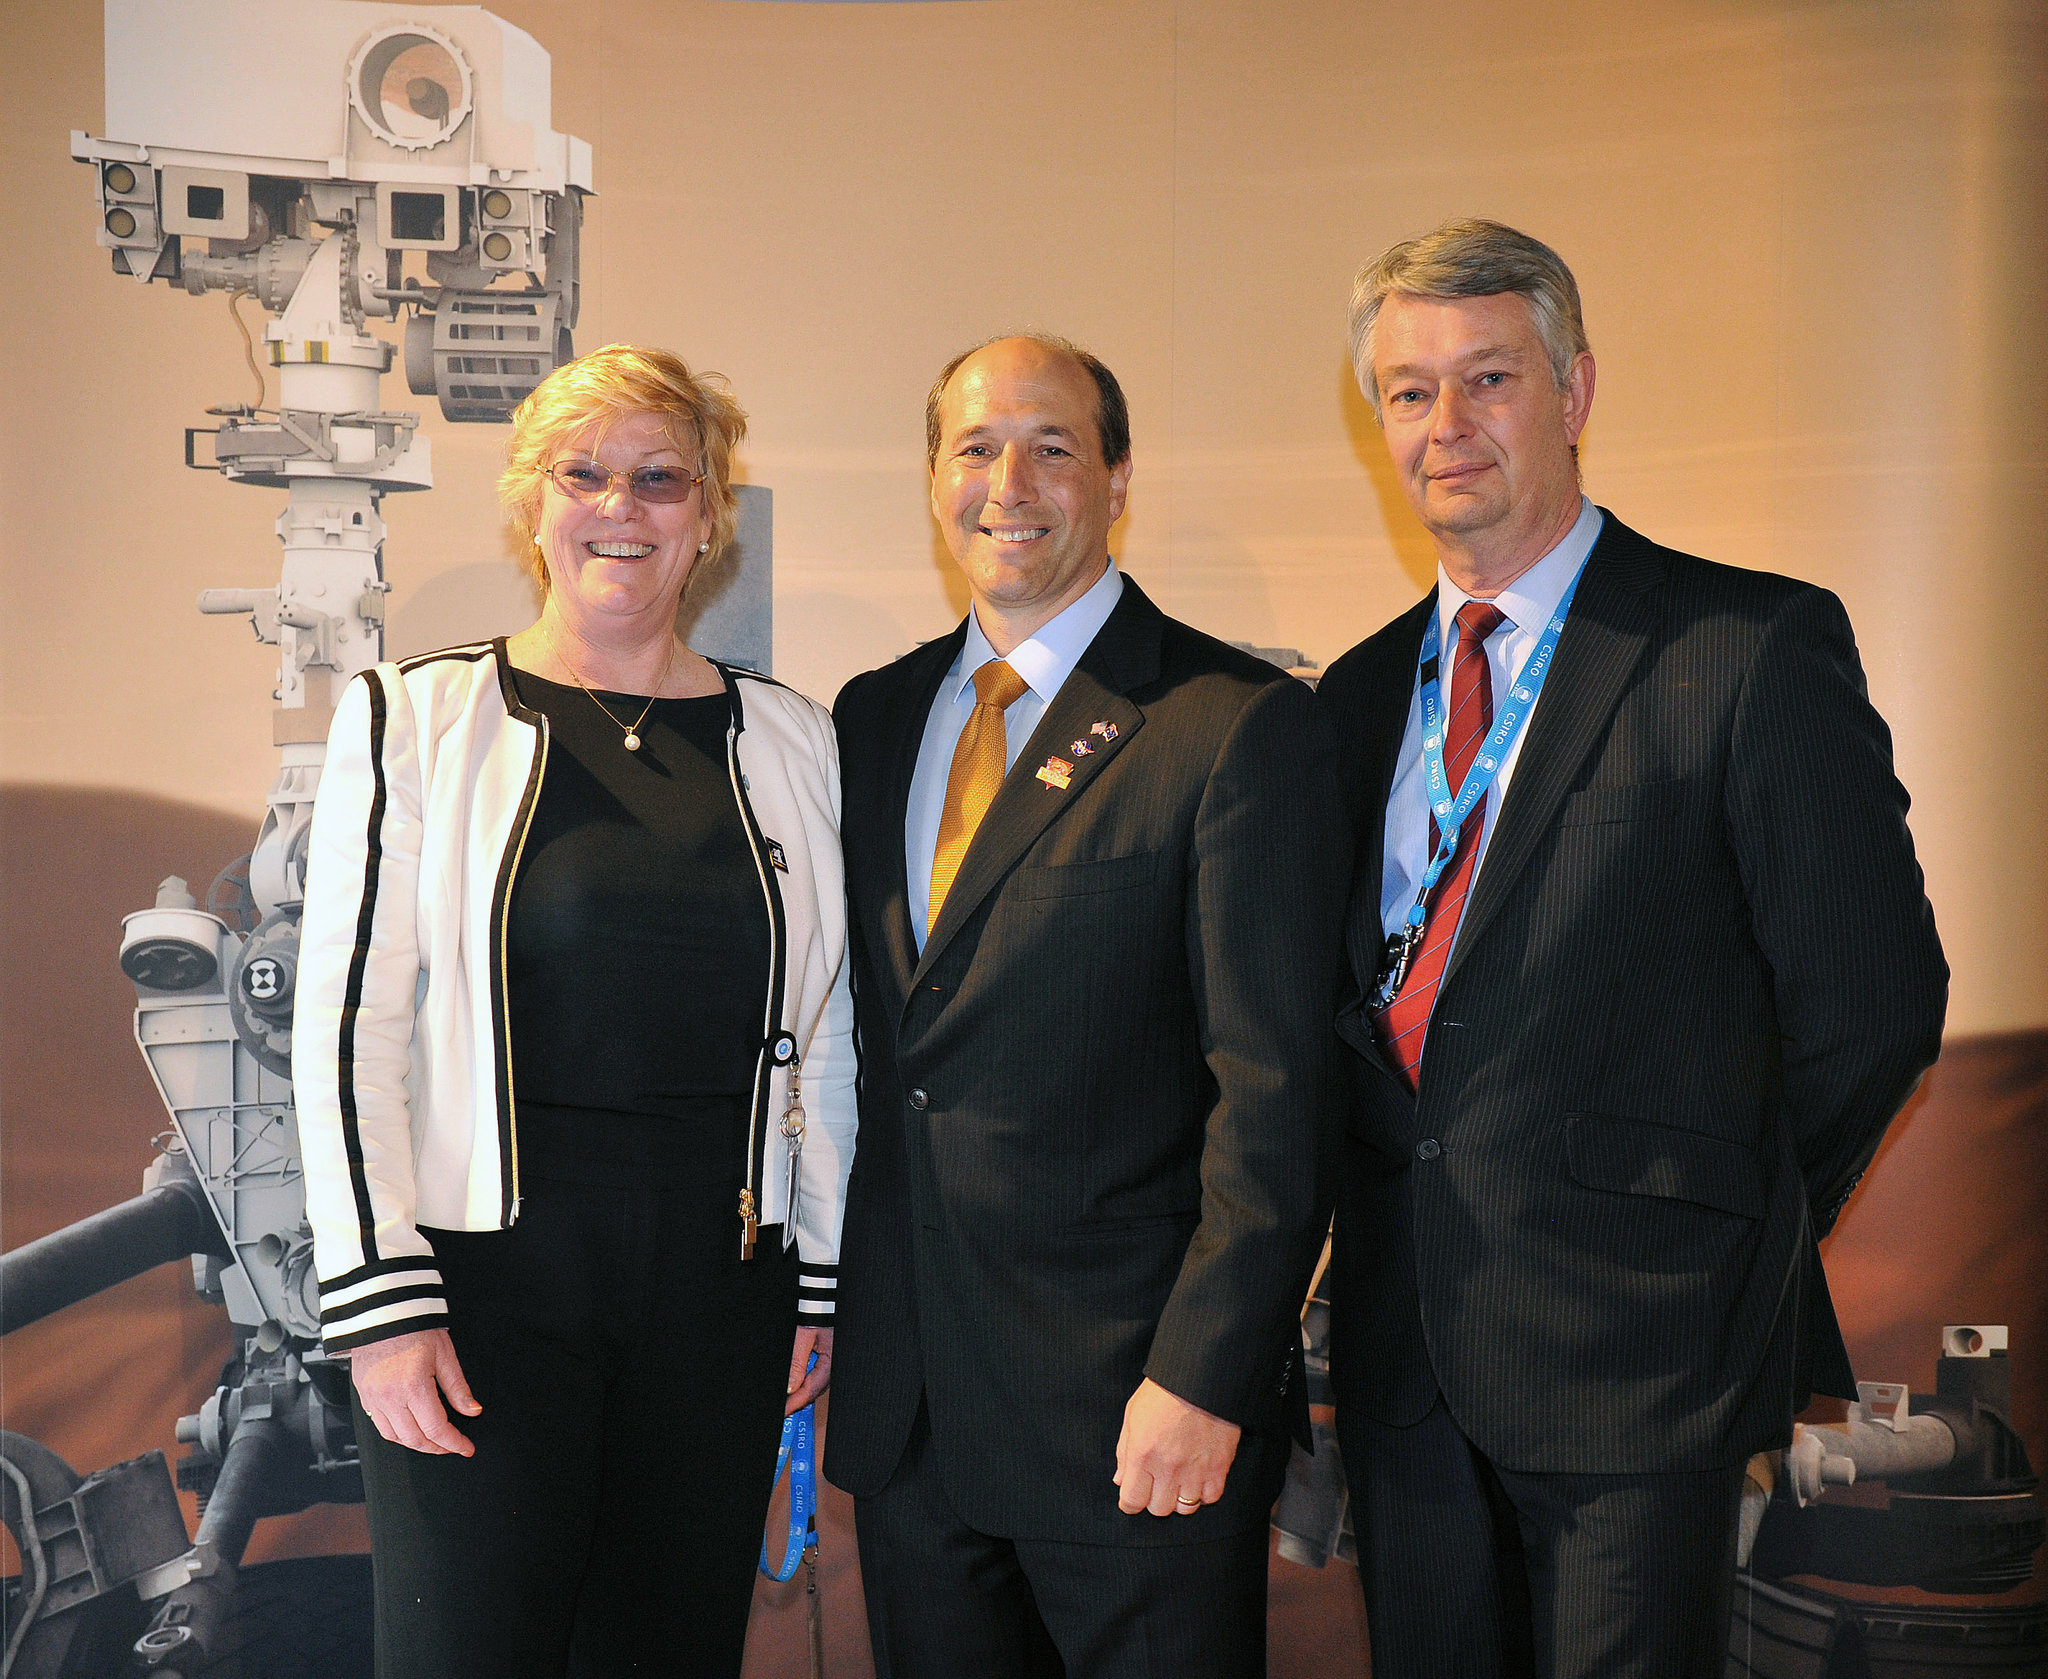 Megan Clark in Space Deep Canberra Communications Complex in 2012 with a director, Ed Kruzins, on the right, followed by US ambassador Jeffrey L. Bleich.